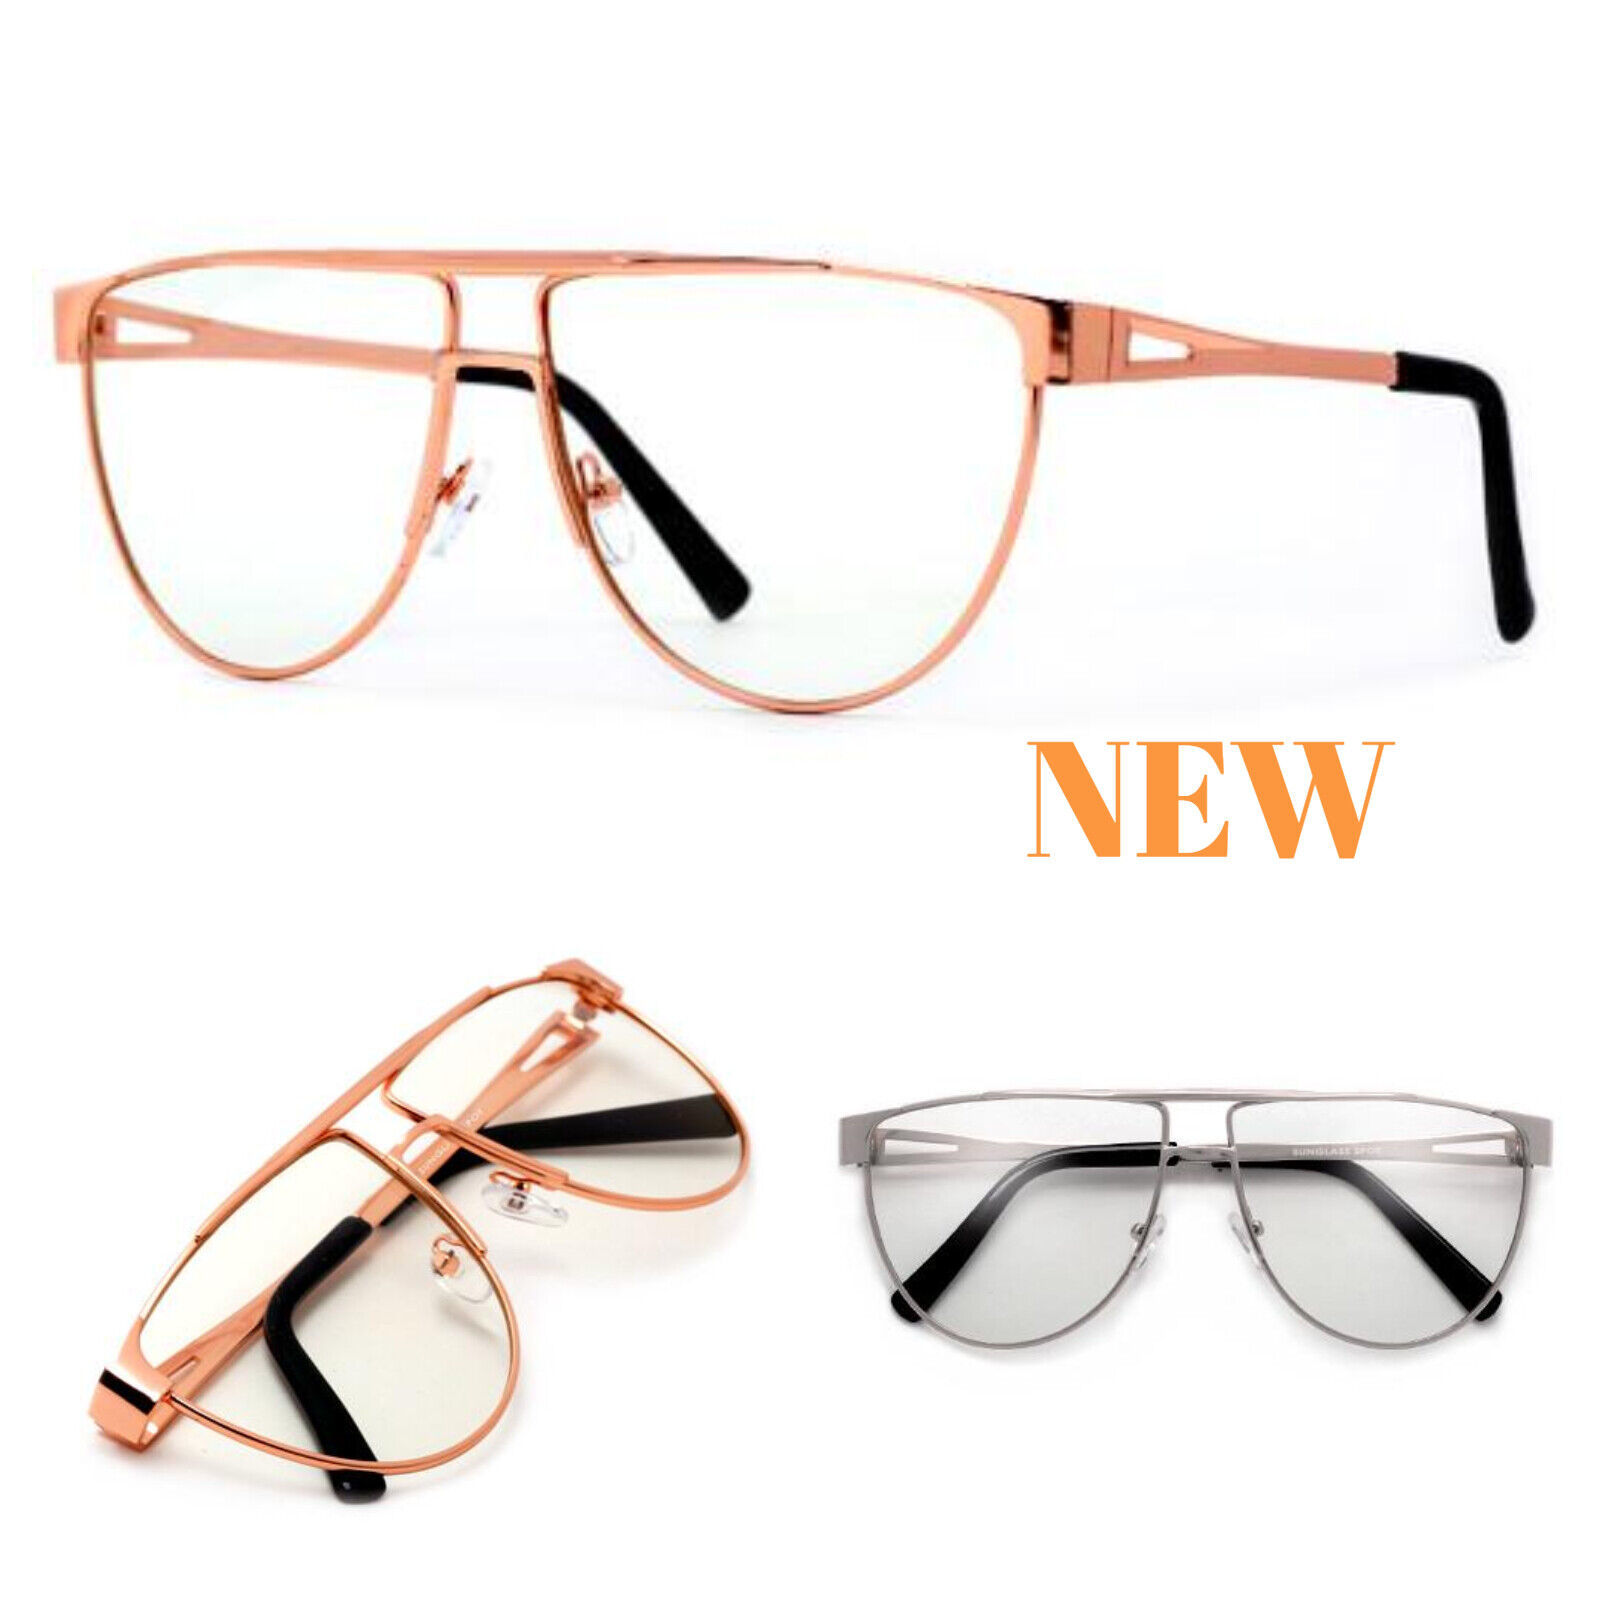 CLASSIC VINTAGE 70's RETRO Style Clear Lens EYE GLASSES Rose Gold Fashion Frame